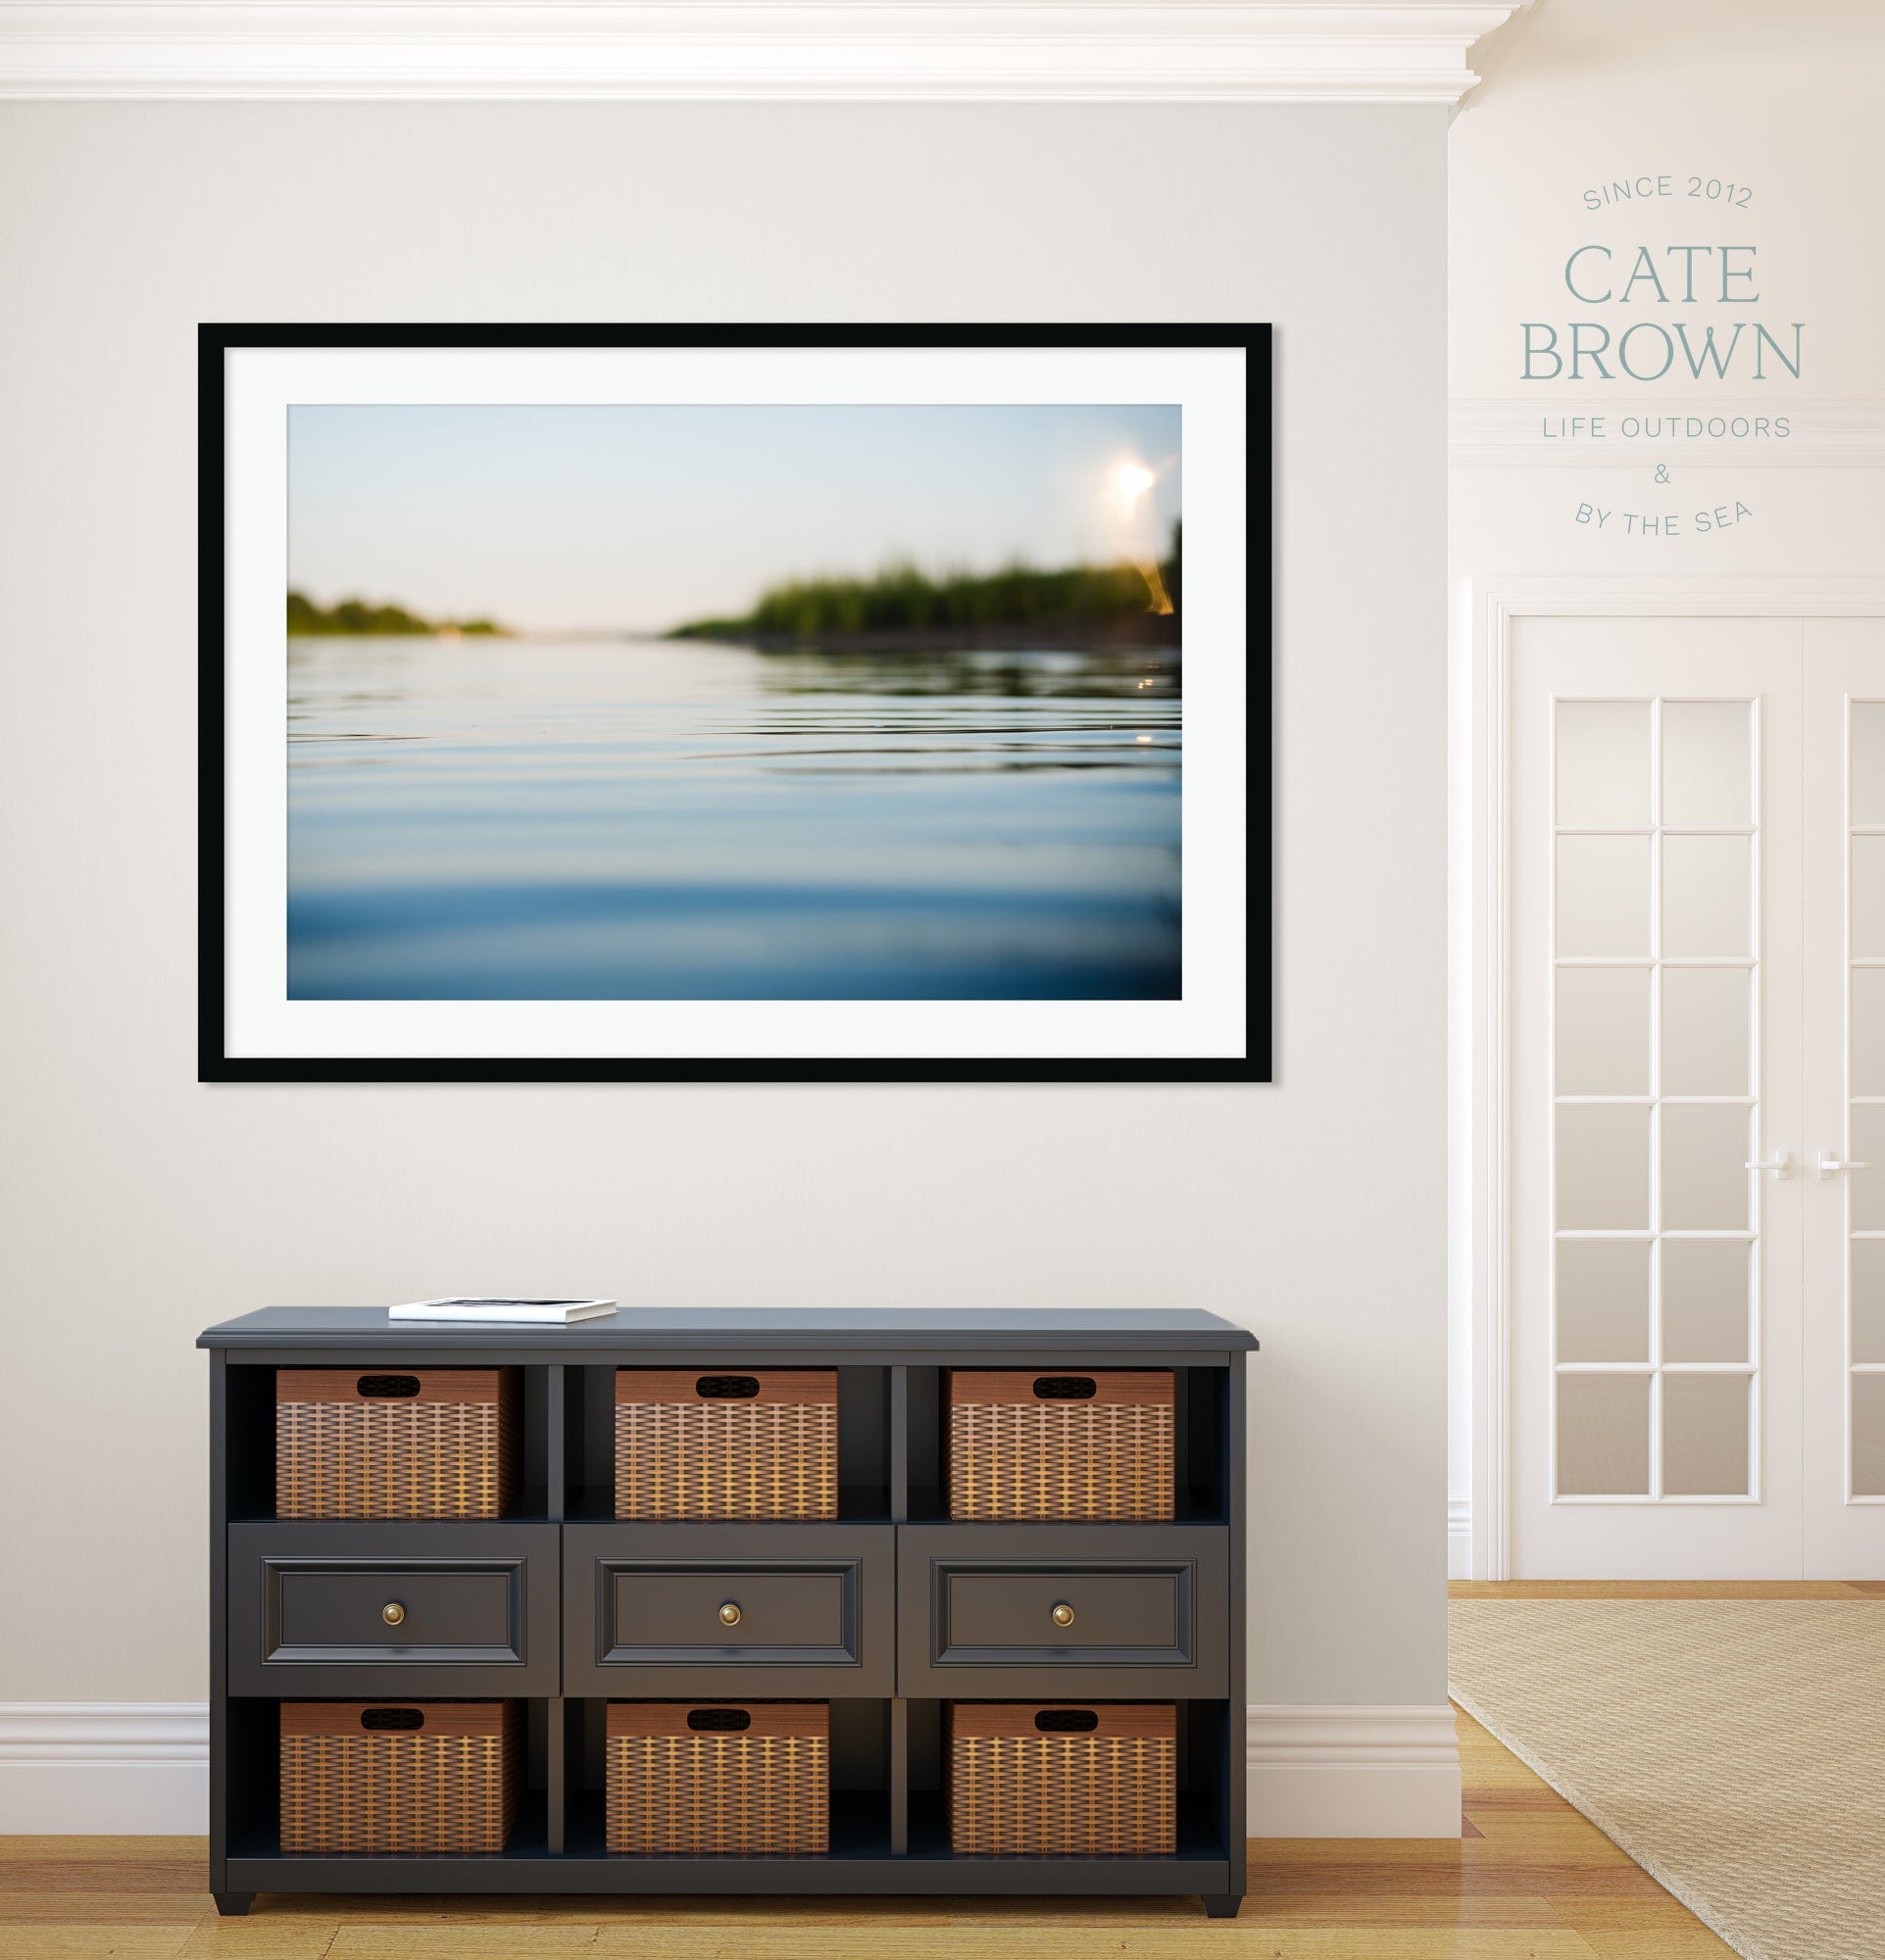 Cate Brown Photo Fine Art Print / 8"x12" / None (Print Only) Wickford Cove at Sunset  //  Ocean Photography Made to Order Ocean Fine Art